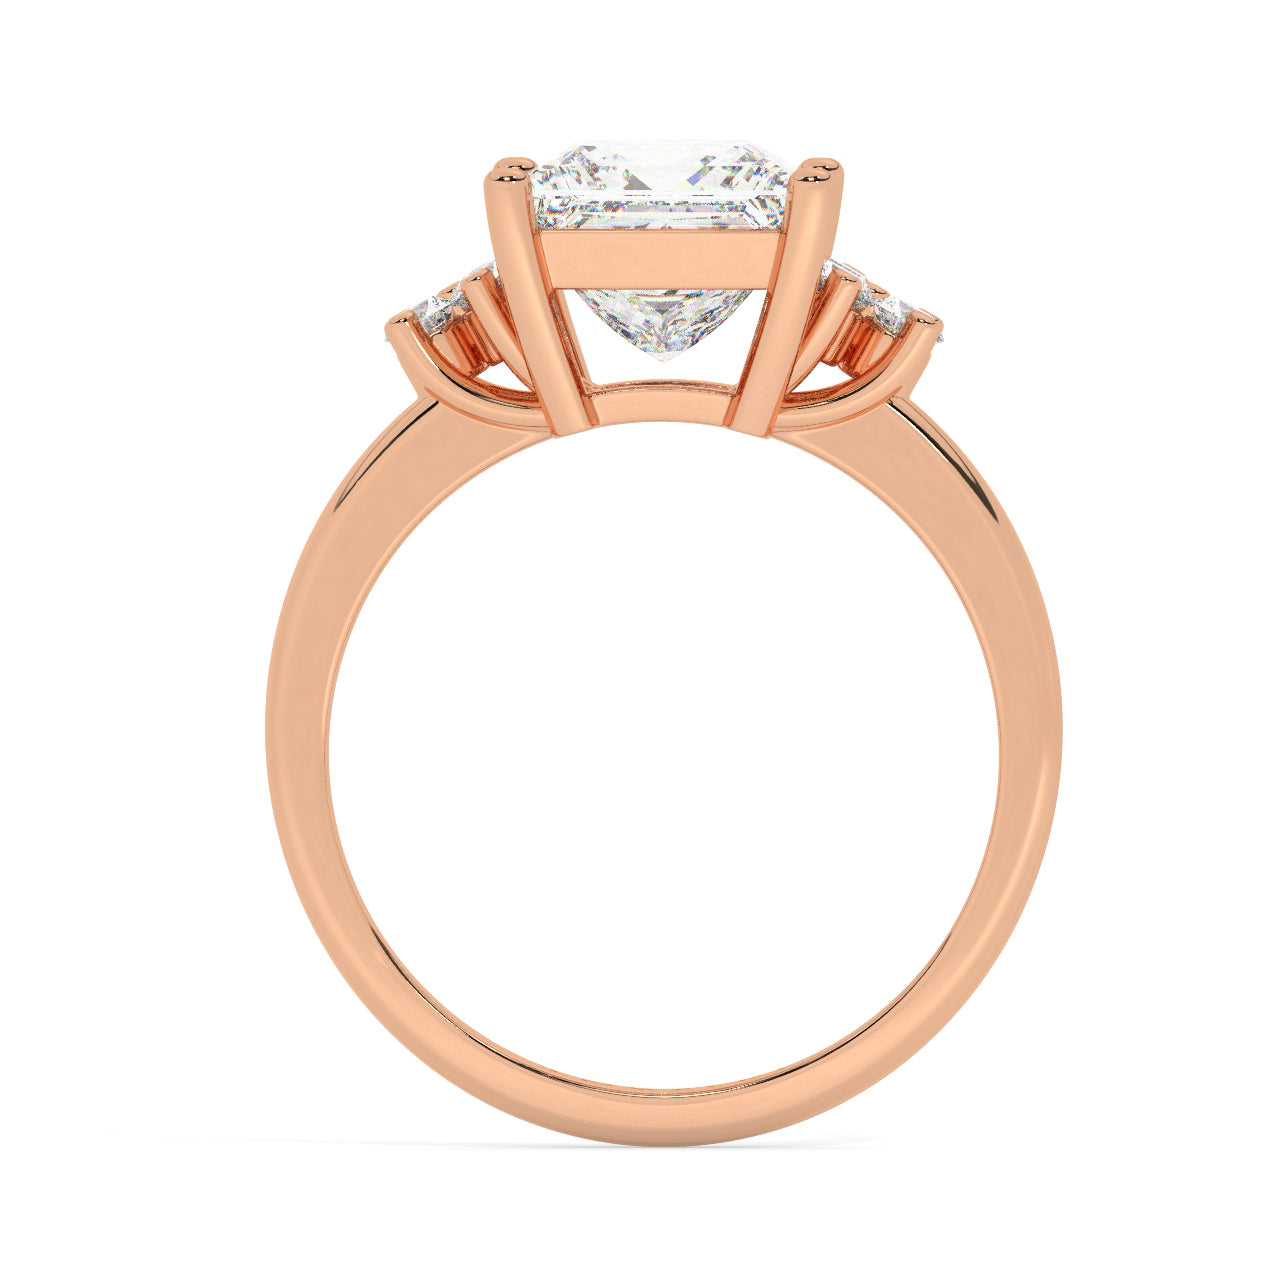 Rose Gold Princess Cut Engagement Ring Accompanied by Round Stones - Side View